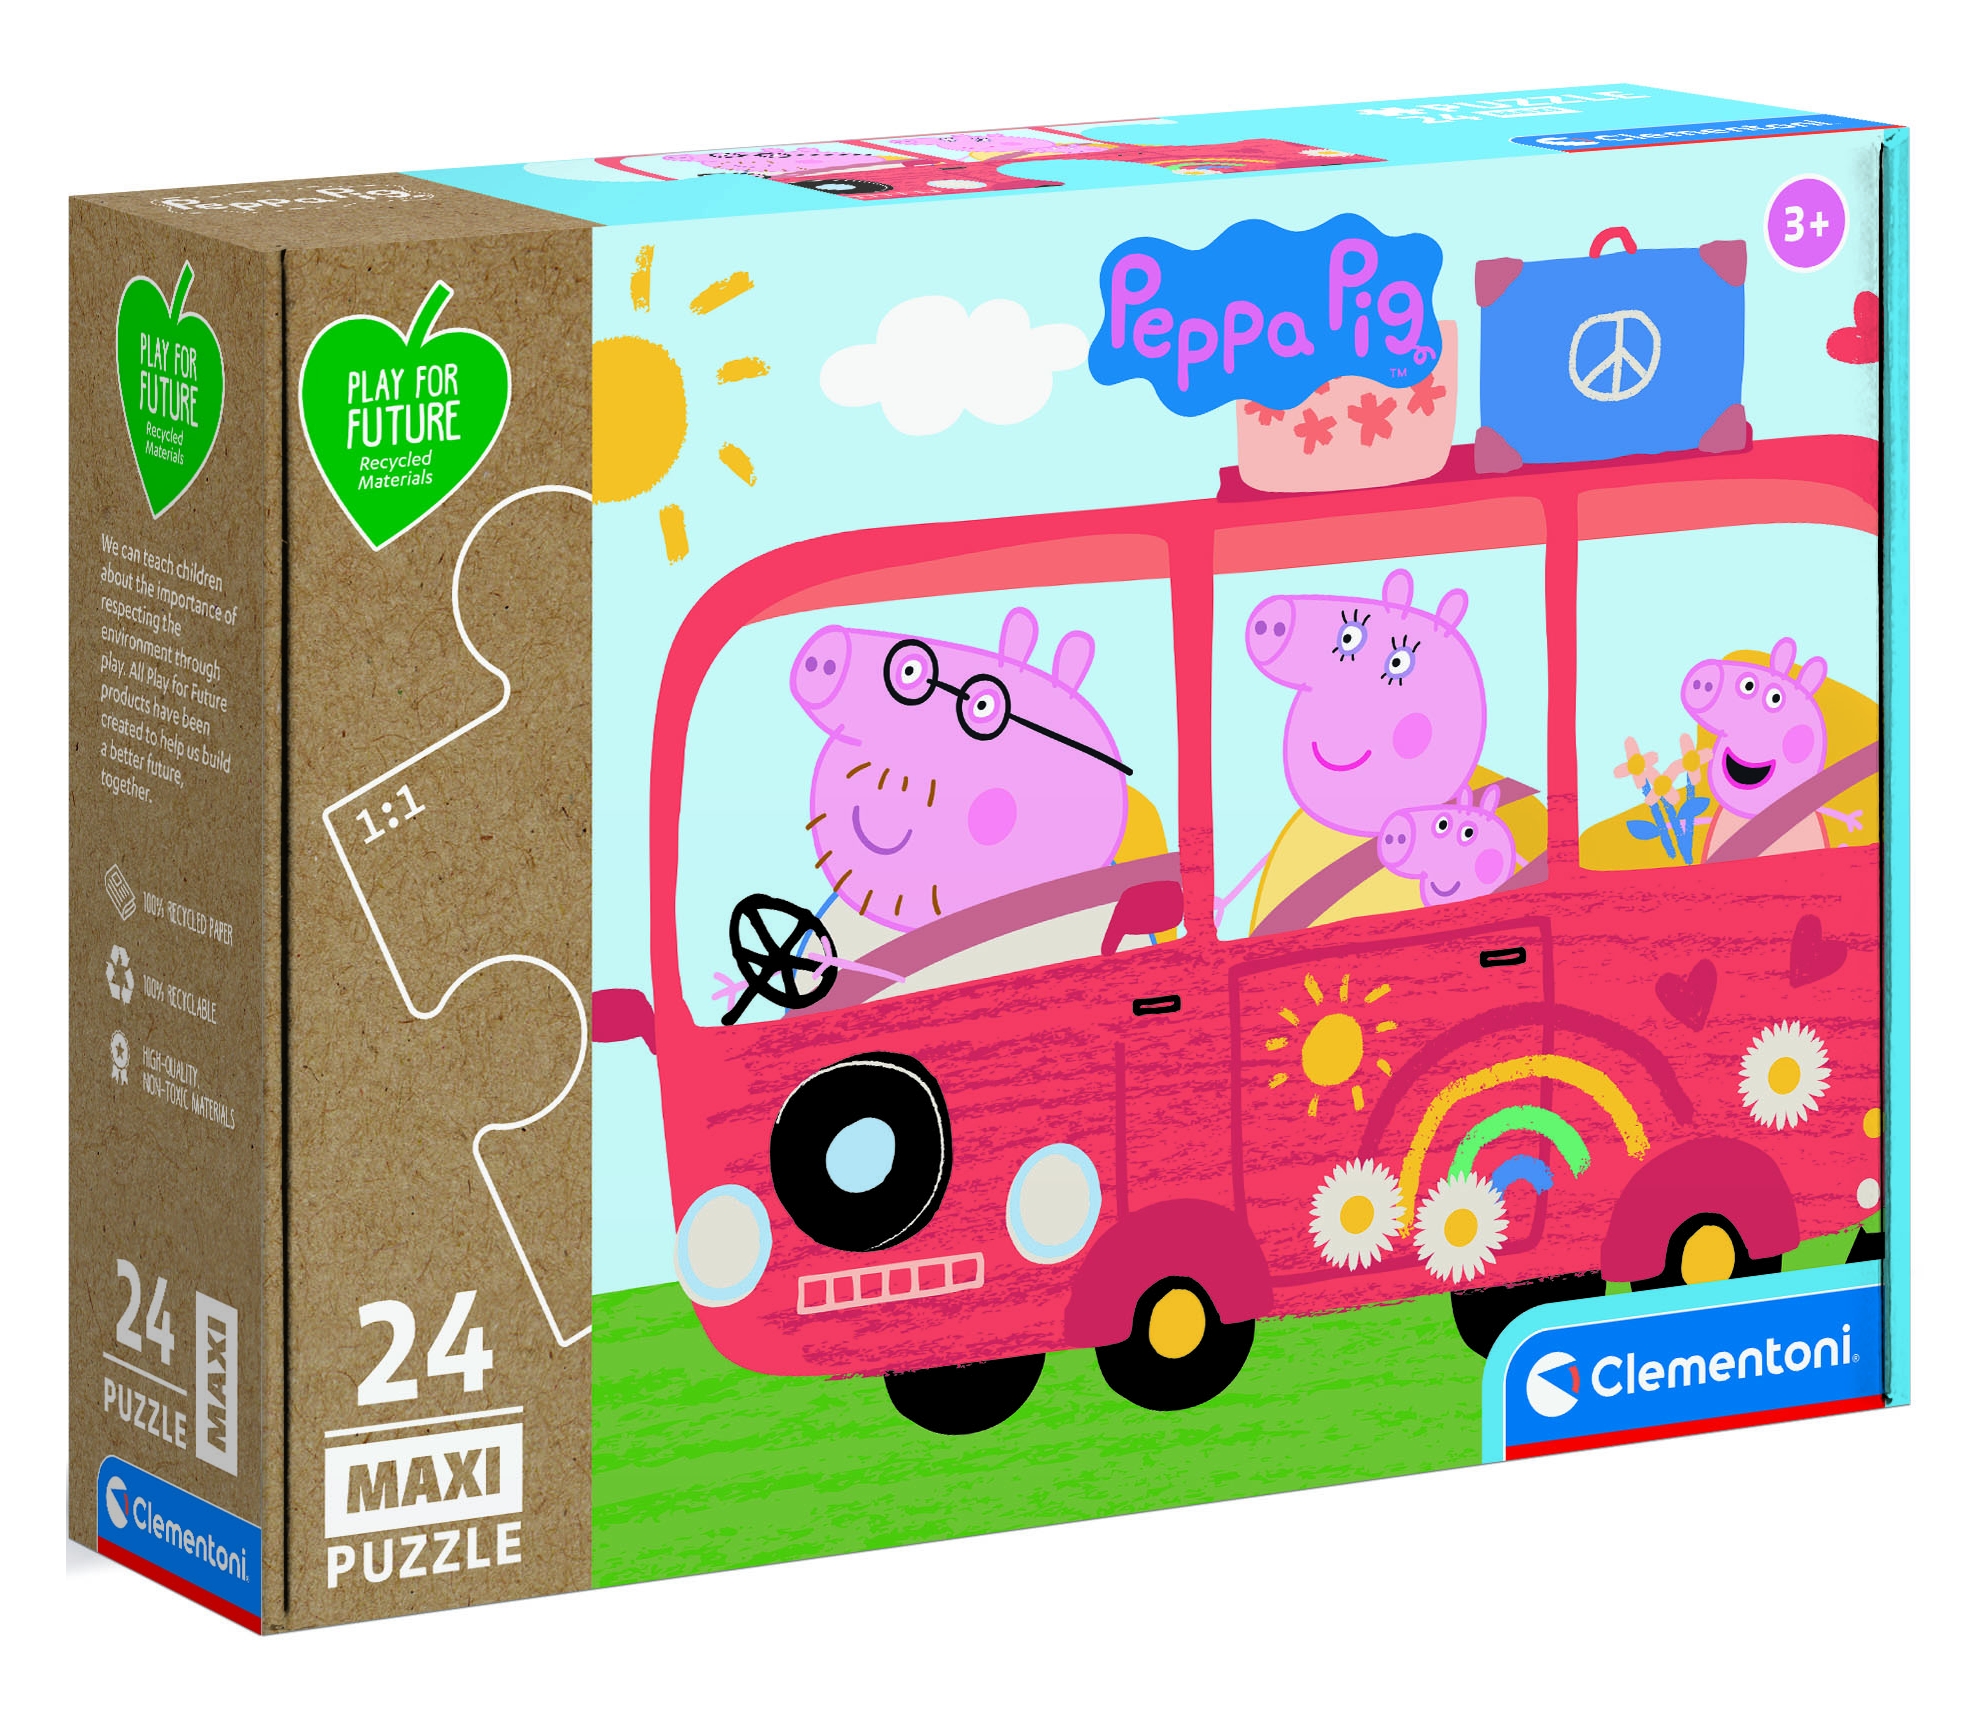 Clementoni, puzzle Maxi Play For Future 24: Peppa Pig (24221)